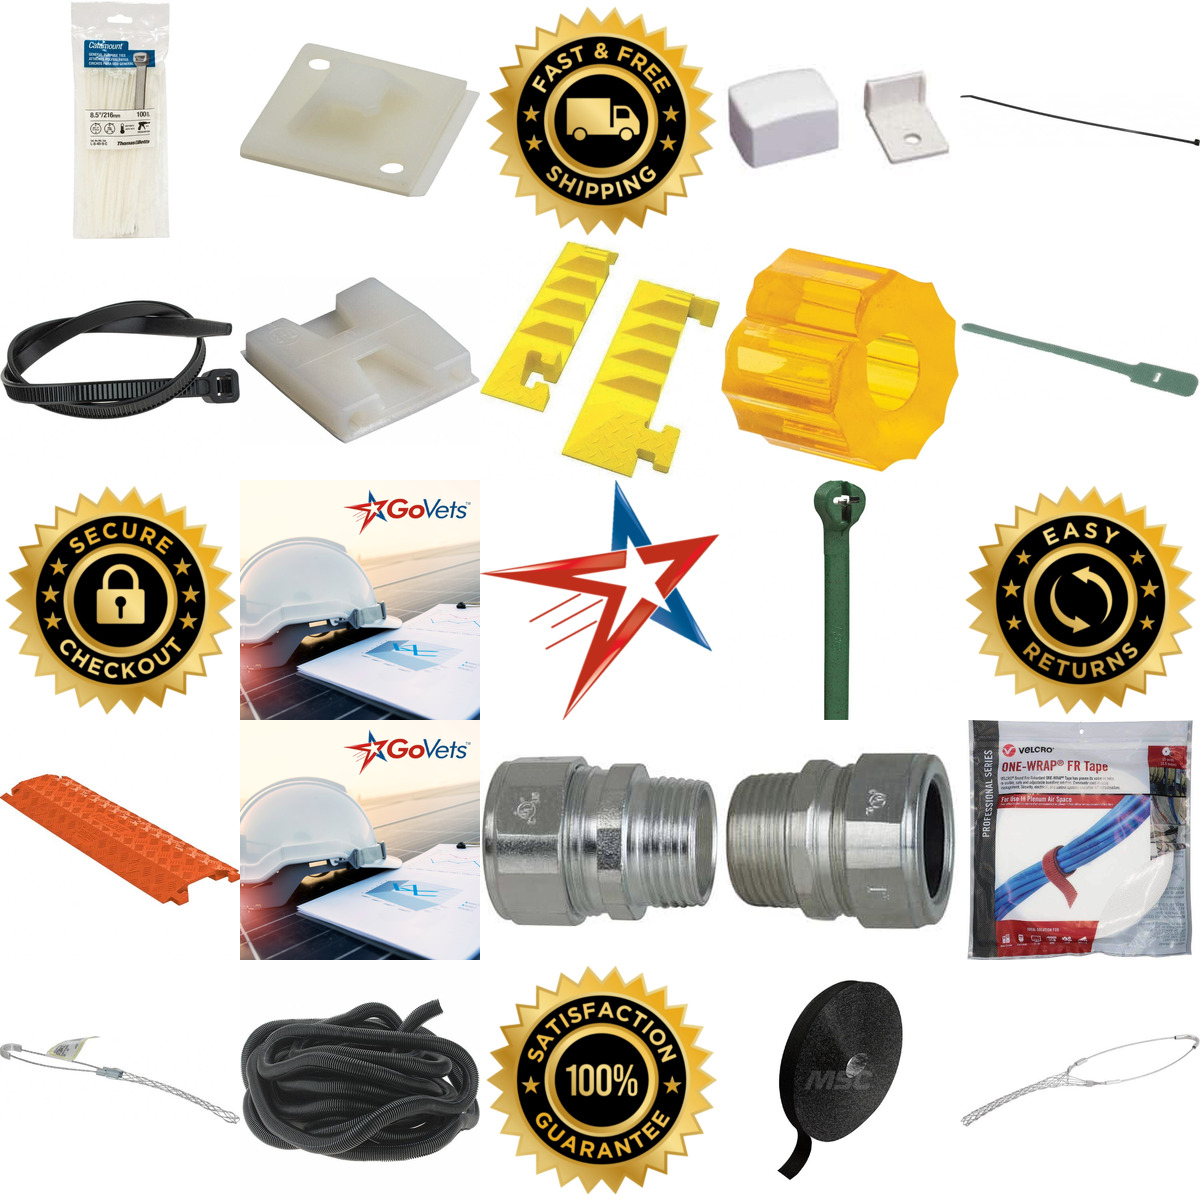 A selection of Wire Management products on GoVets